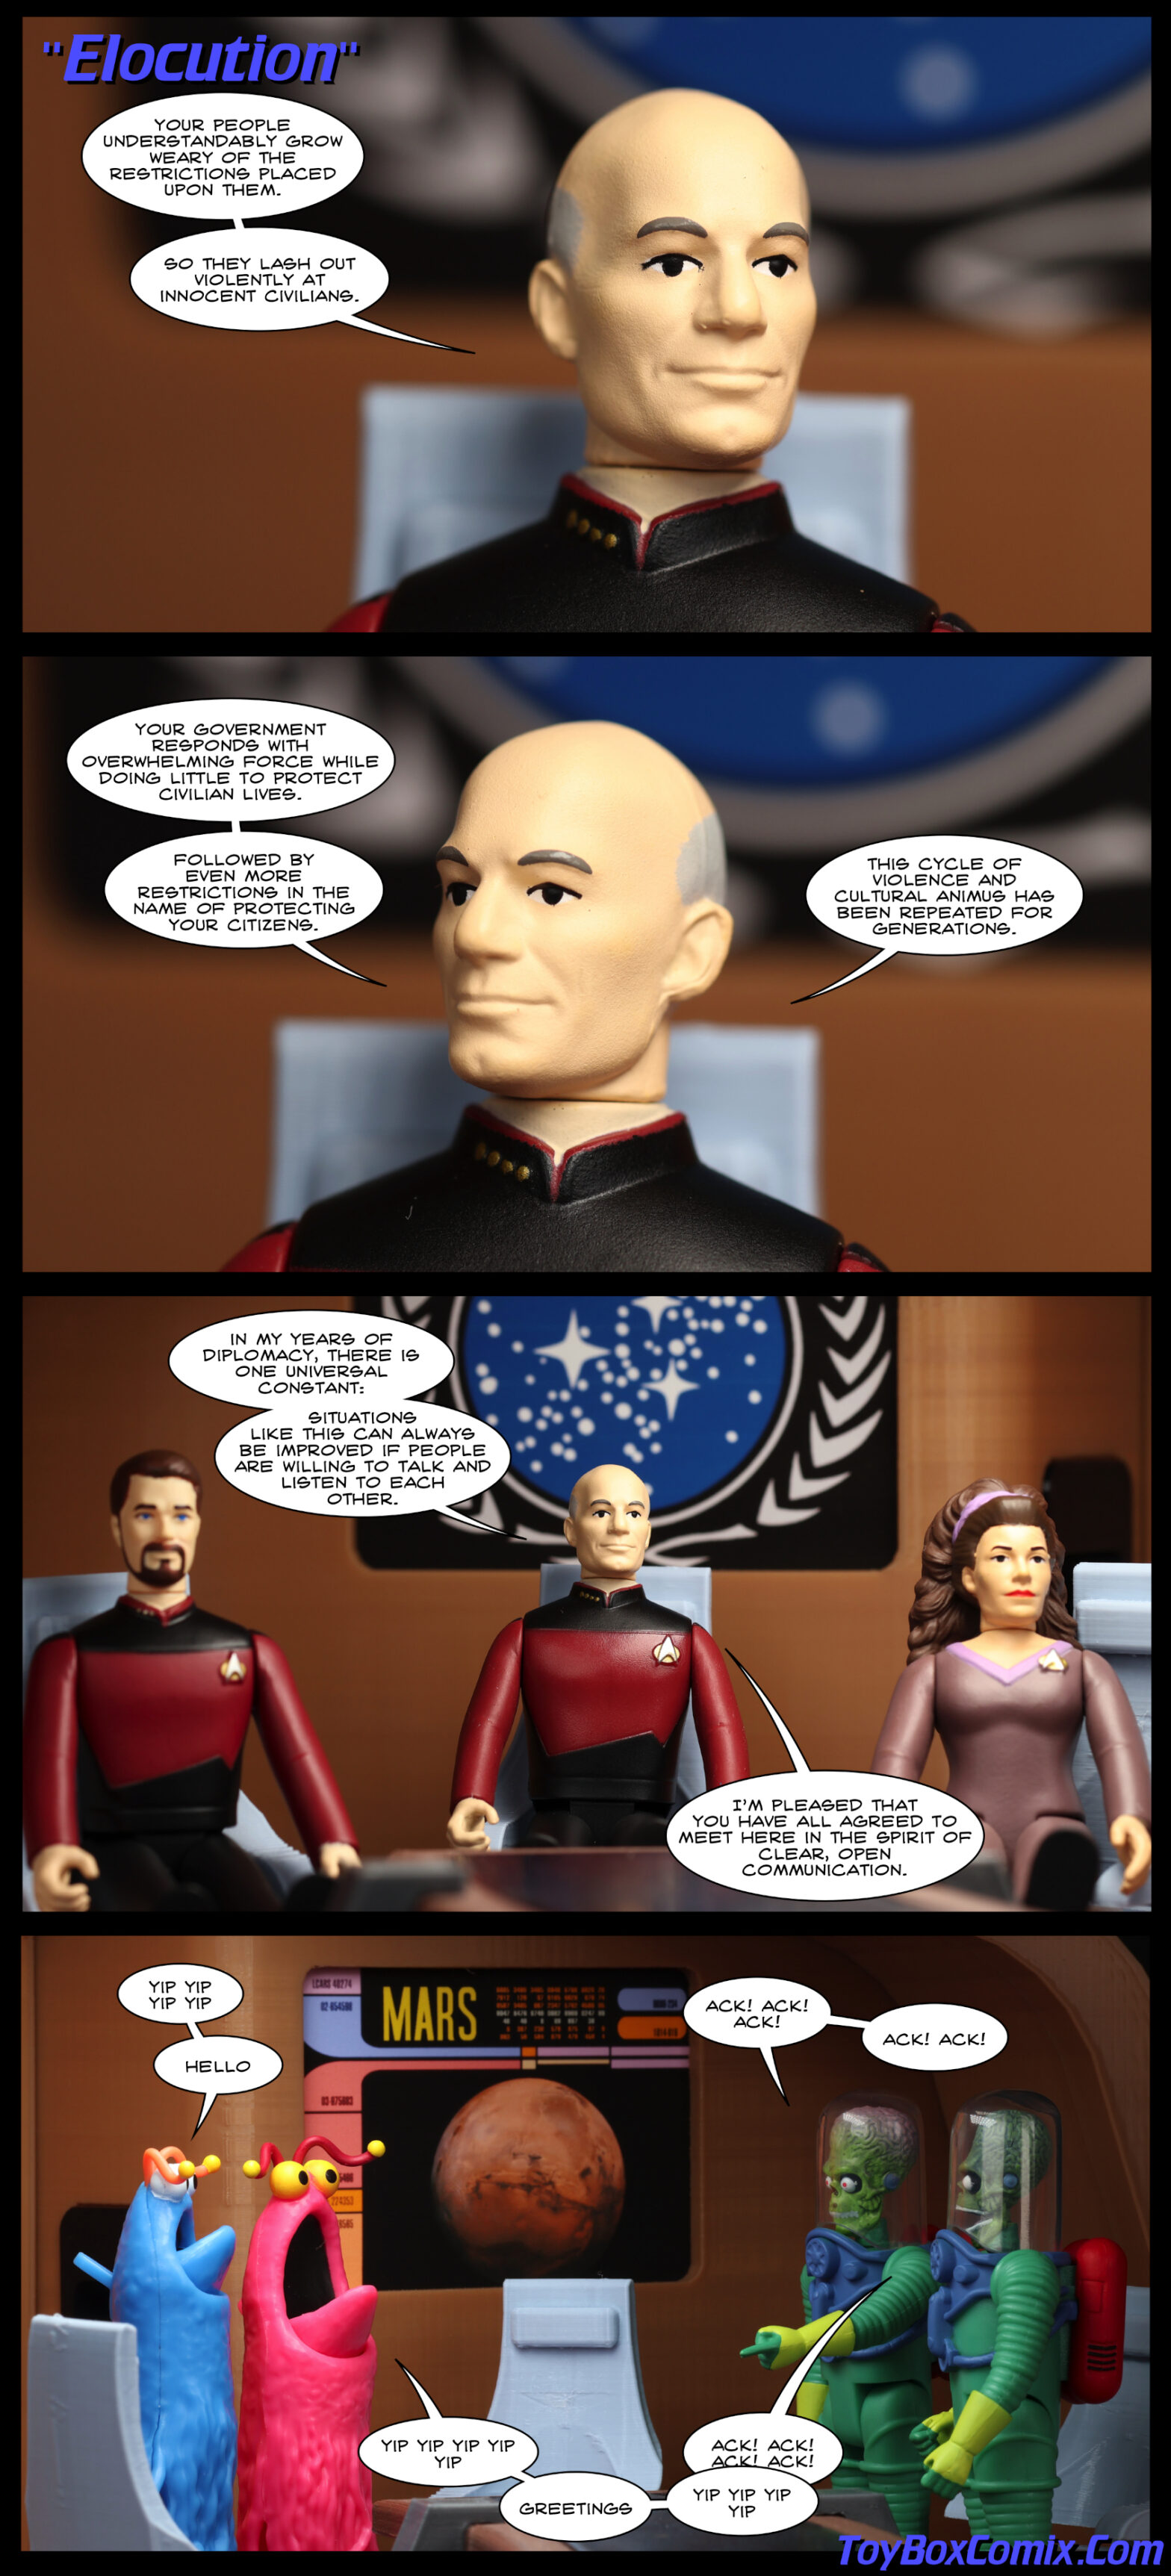 Location: Enterprise-D observation lounge Panel 1: Star Trek TNG-style title: “Elocution.” Picard, looking left: “Your people understandably grow weary of the restrictions placed upon them. So they lash out violently at innocent civilians.” 2: Picard, looking right: “Your government responds with overwhelming force while doing little to protect civilian lives. Followed by even more restrictions in the name of protecting your citizens. This cycle of violence and cultural animus has been repeated for generations.” 3: Picard, flanked by Riker and Troi: “In my years of diplomacy, there is one universal constant: situations like this can always be improved if people are willing to talk and listen to each other. I’m pleased that you have all agreed to meet here in the spirit of clear, open communication.” 4: At the other end of the table, Mars is on the view screen. Sesame Street Martians stand on one side, saying “yip yip yip yip hello yip yip yip yip greetings yip yip yip.” Mars Attacks Martians stand at the other side, saying “Ack! Ack! Ack! Ack! Ack!”